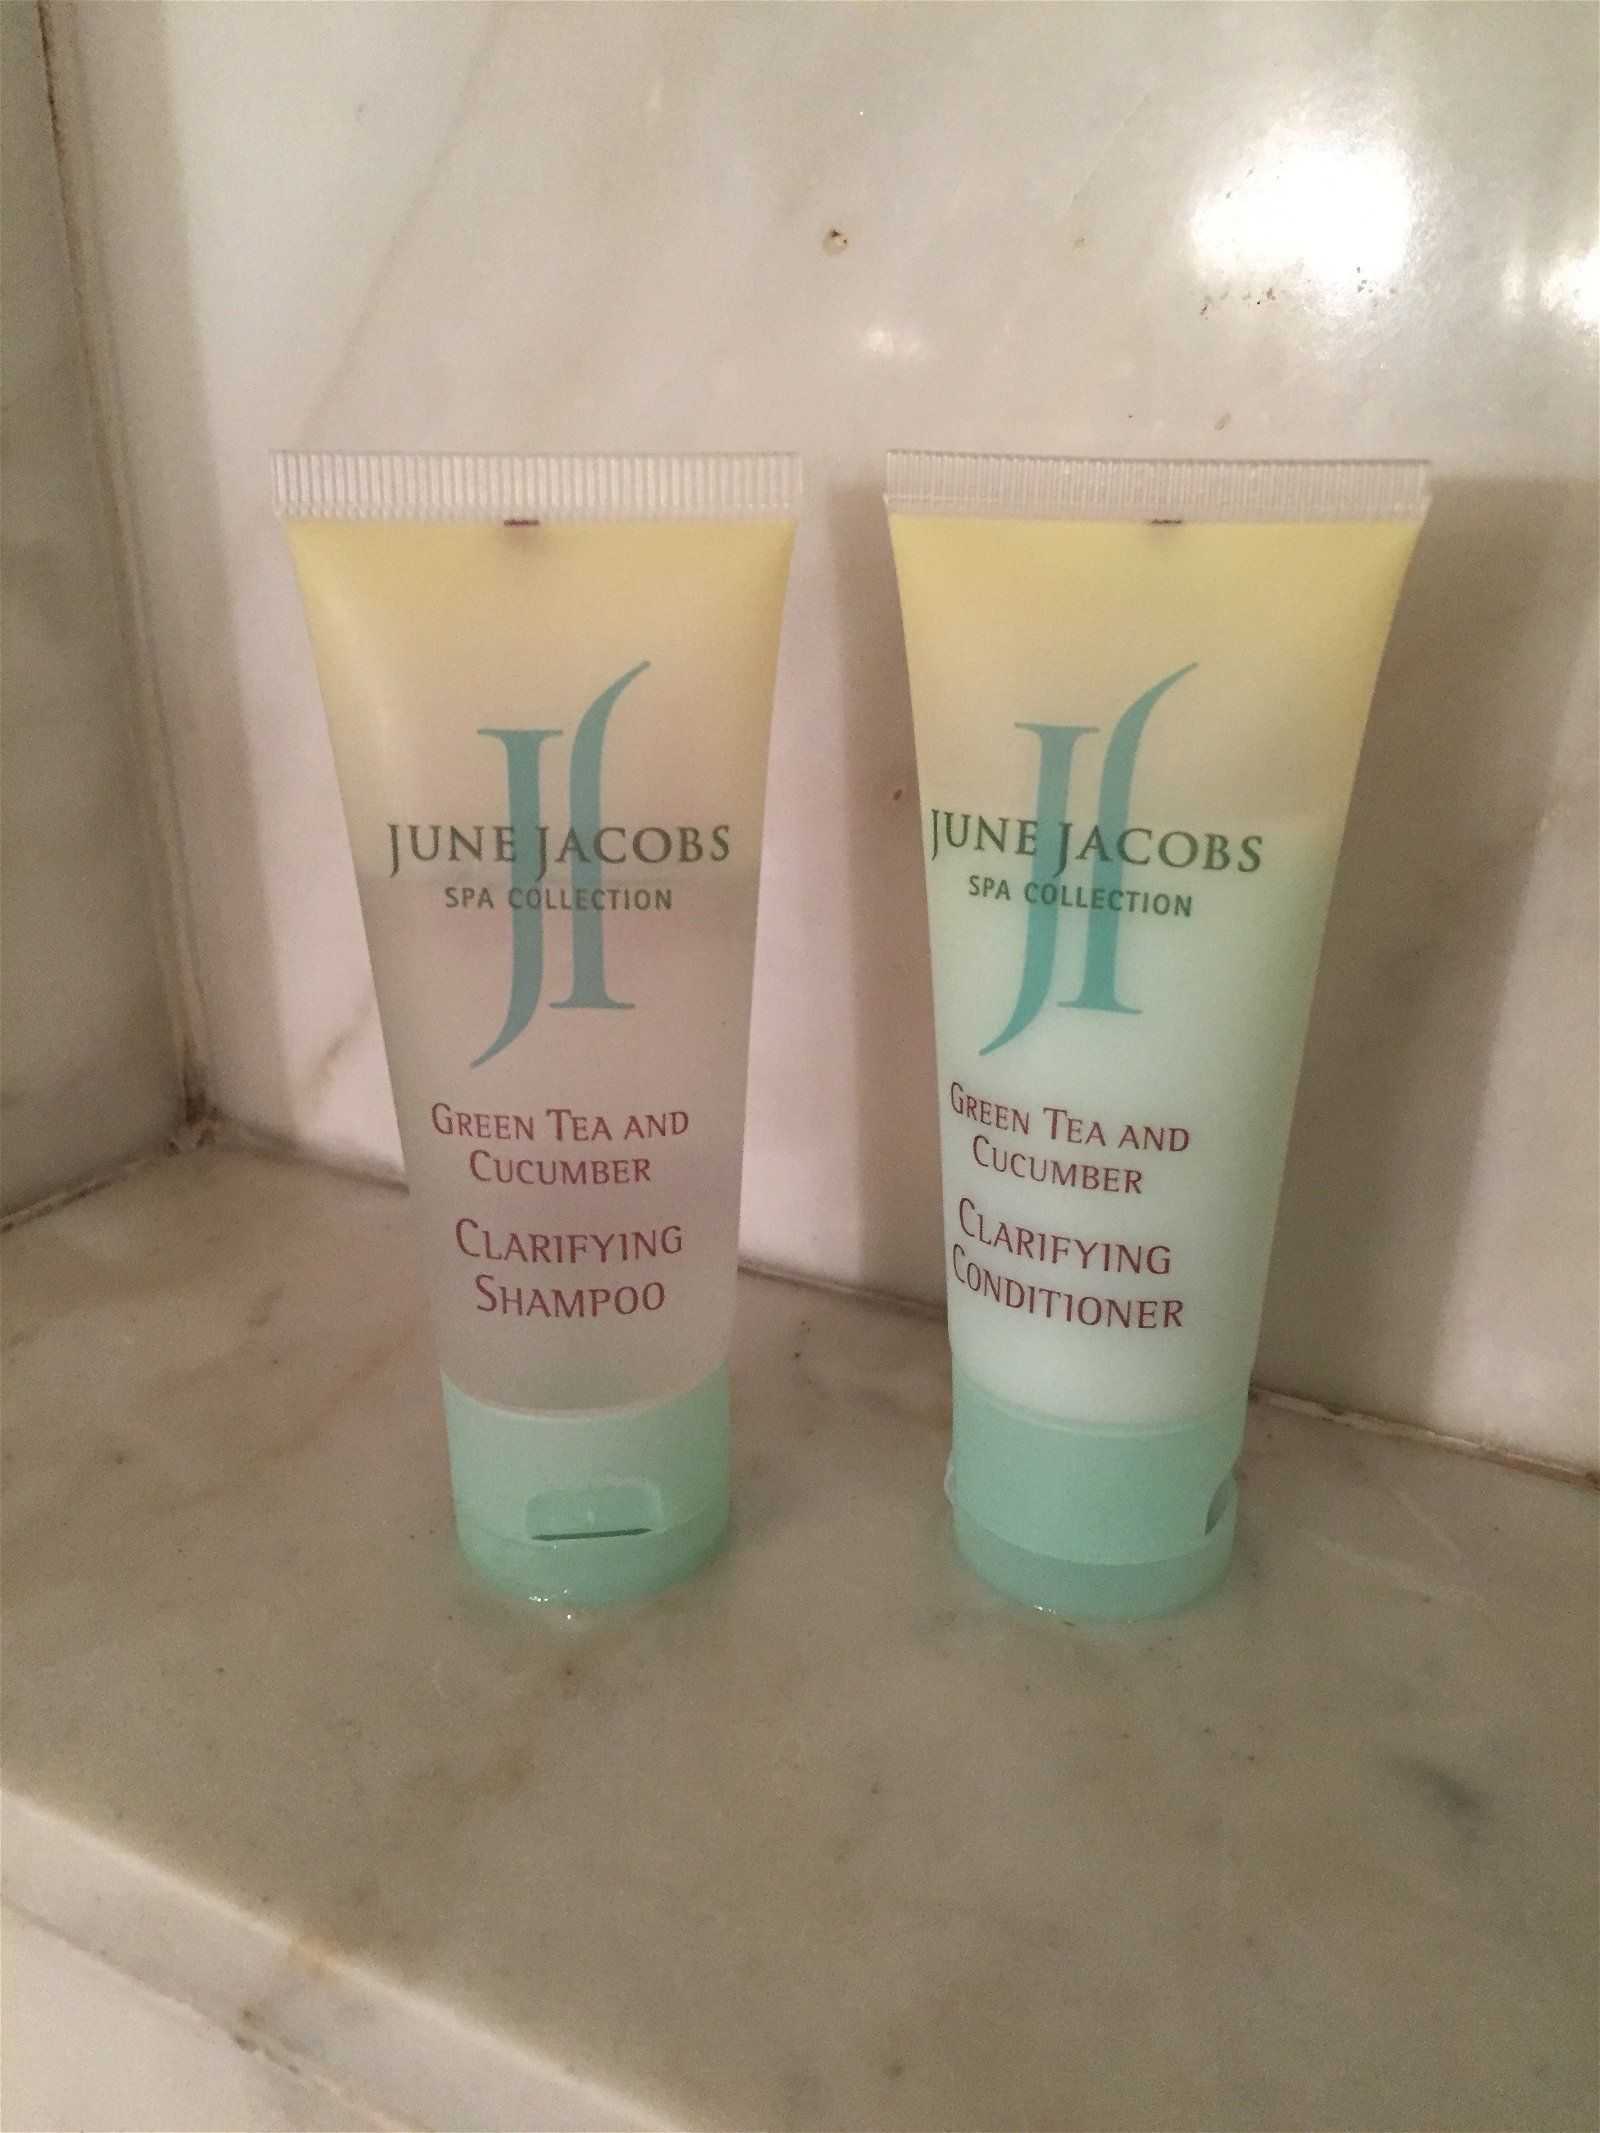 June Jacobs Spa Collection toiletries